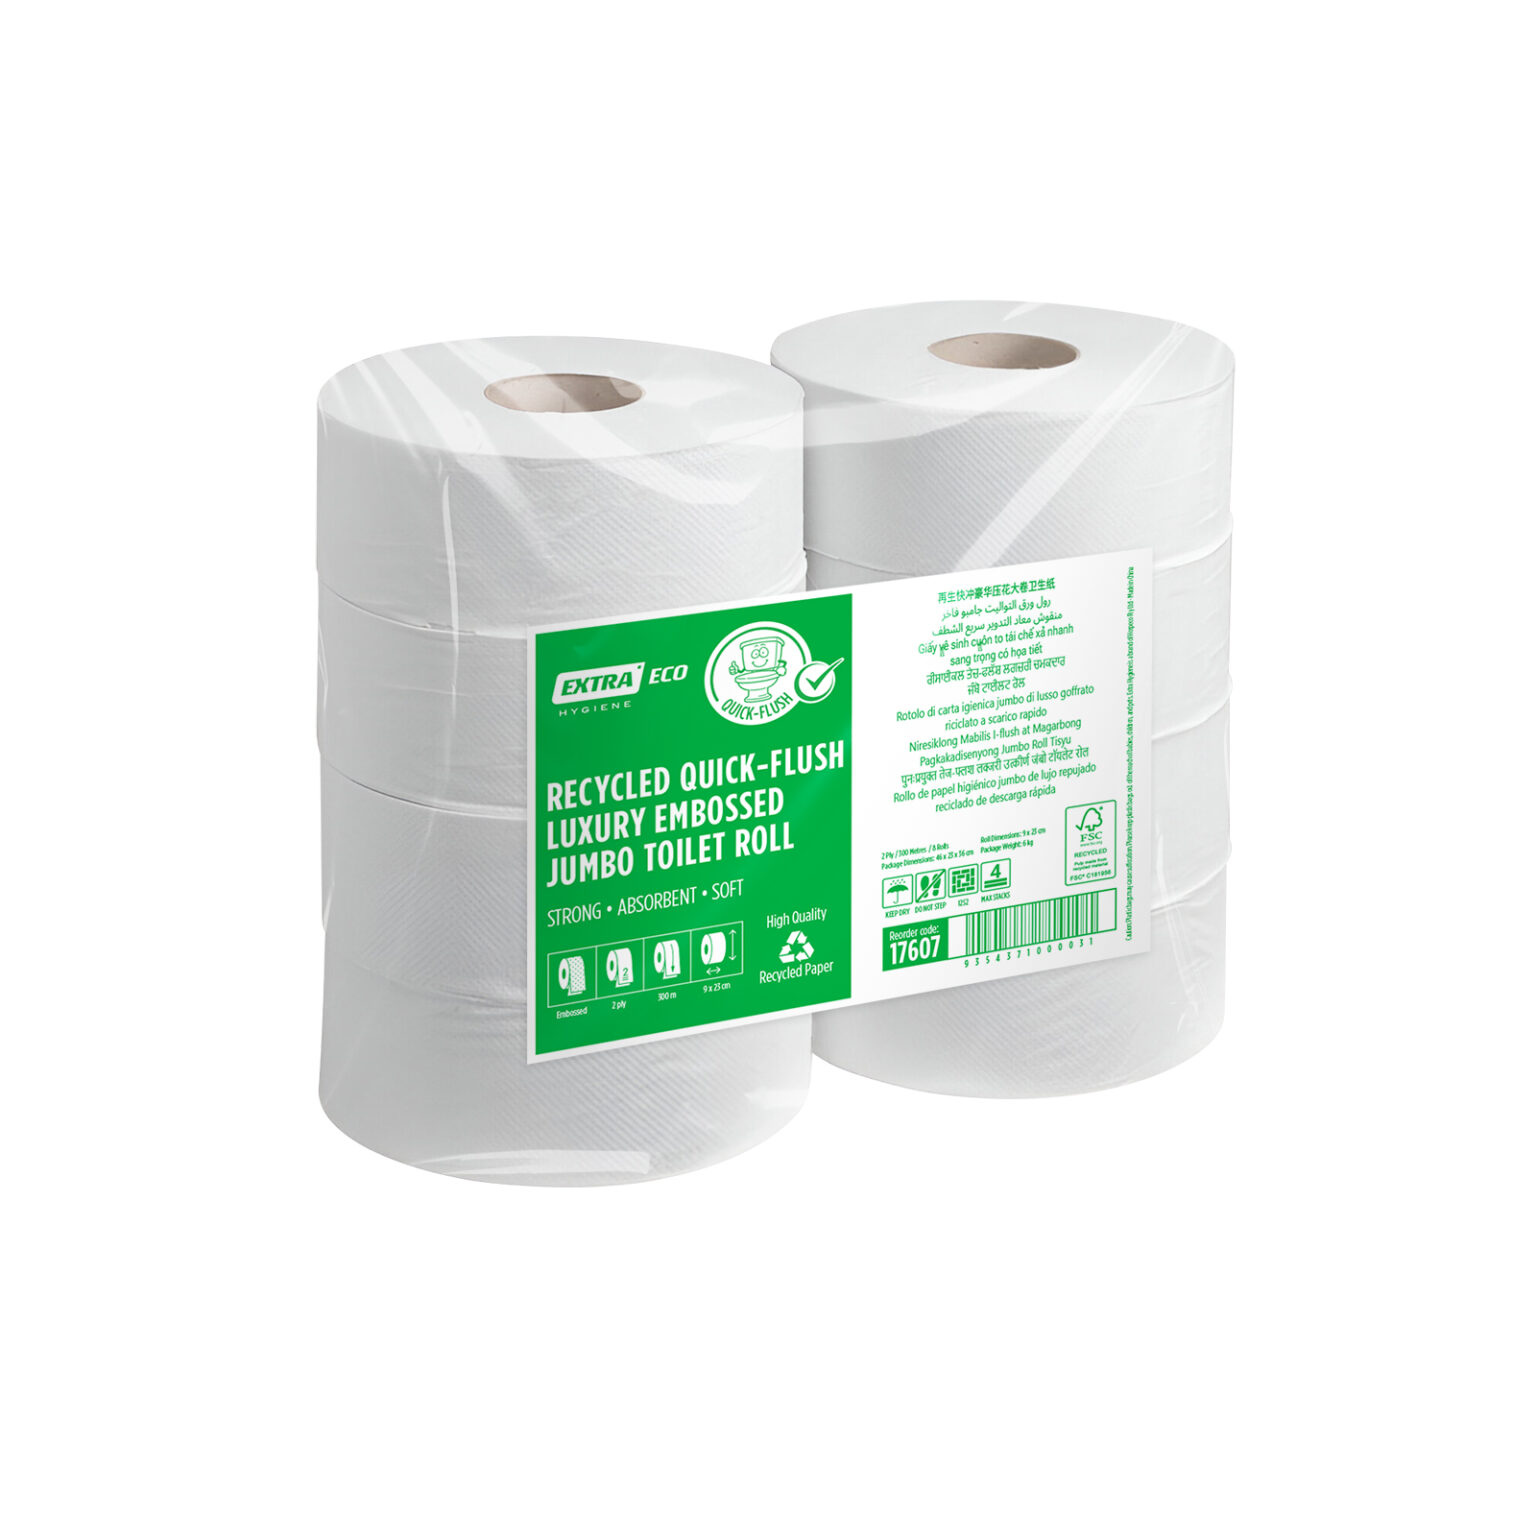 17607-Extra-Hygiene-Recycled-Quick-Flush-Jumbo-Toilet-Paper-1600x1600